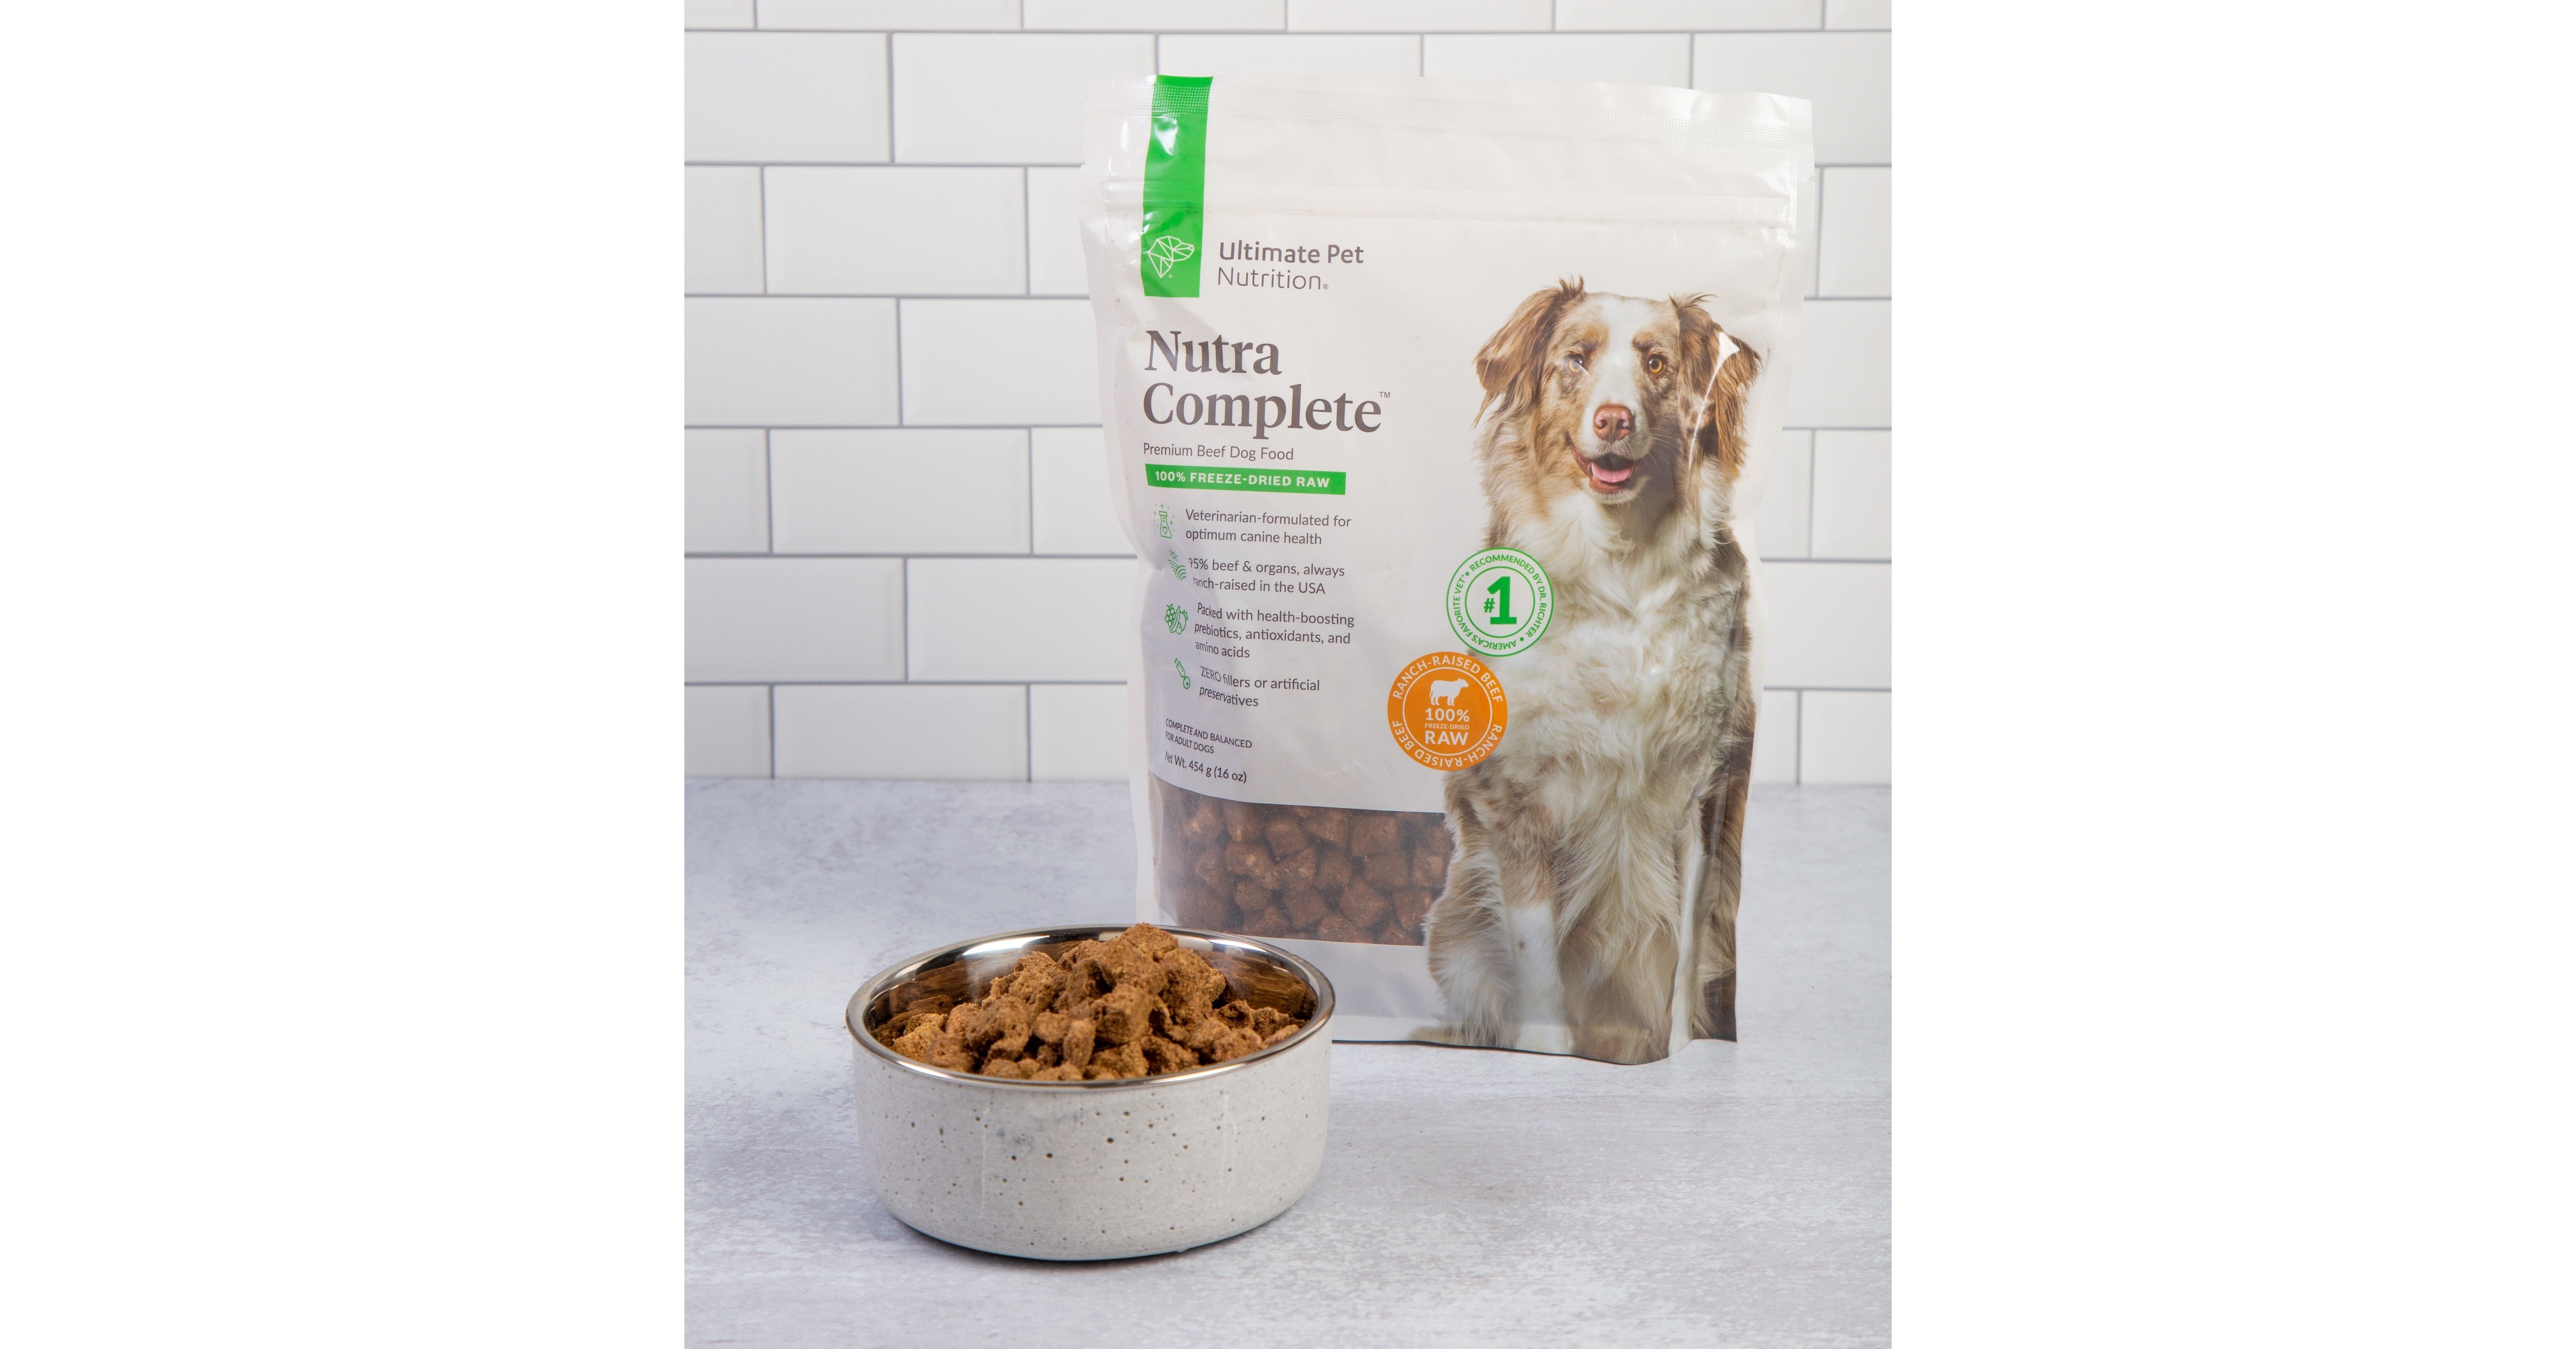 Celebrate National Pet Day with Dr. Gary Richter’s Ultimate Pet Nutrition Nutra Complete for Dogs